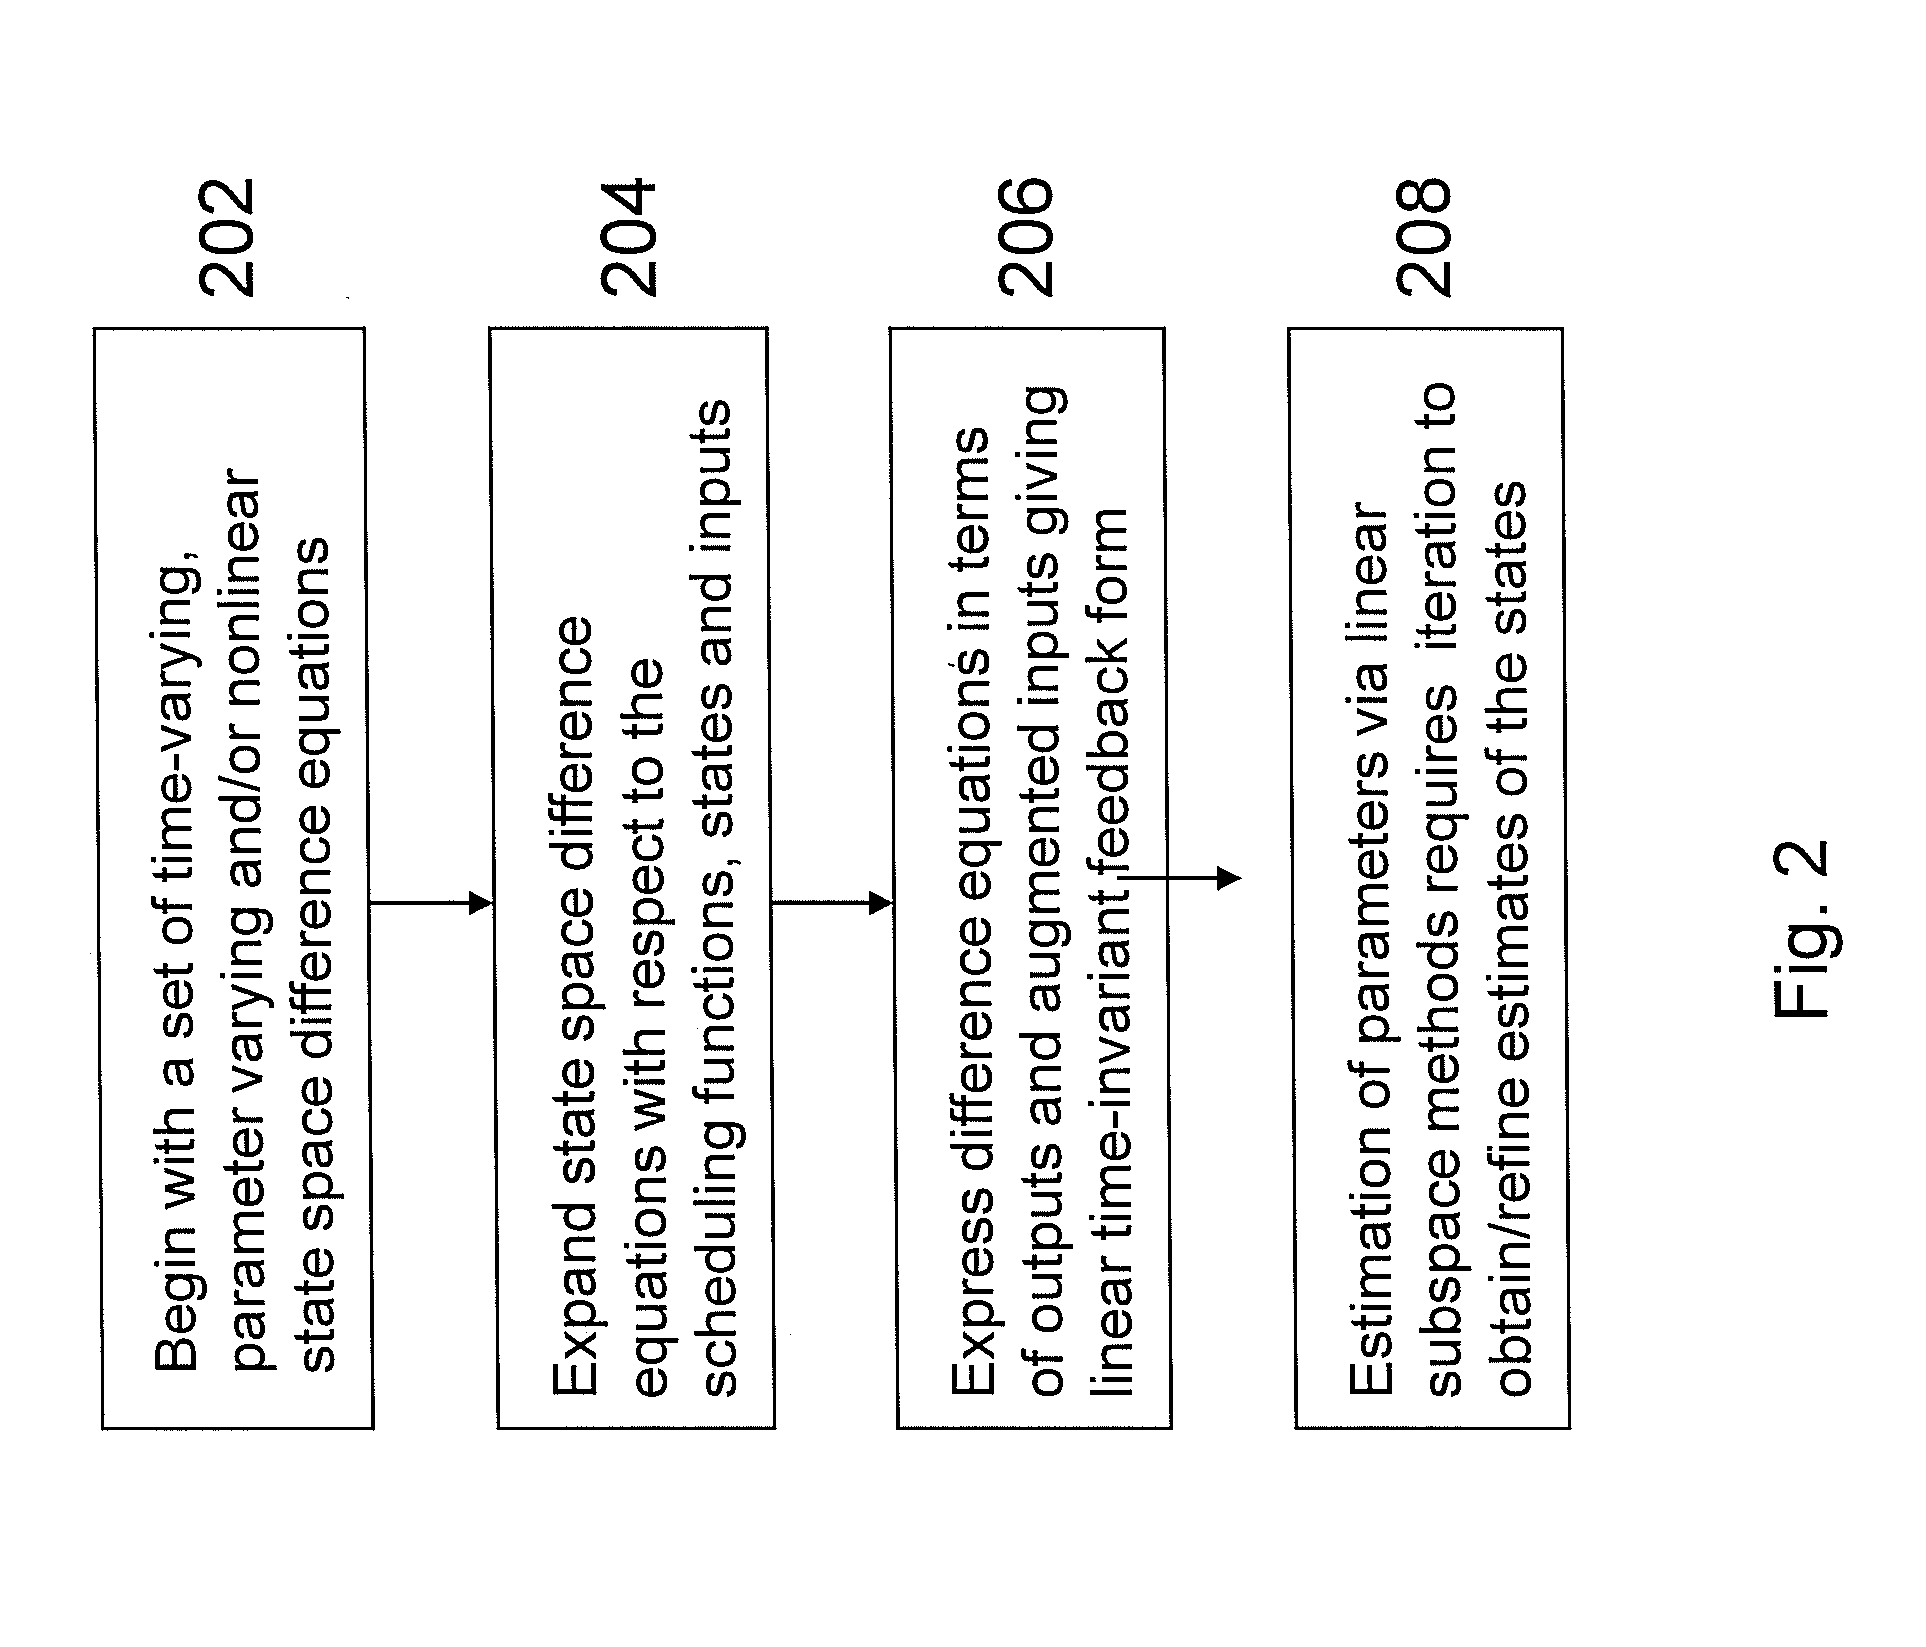 Method and system for empirical modeling of time-varying, parameter-varying, and nonlinear systems via iterative linear subspace computation